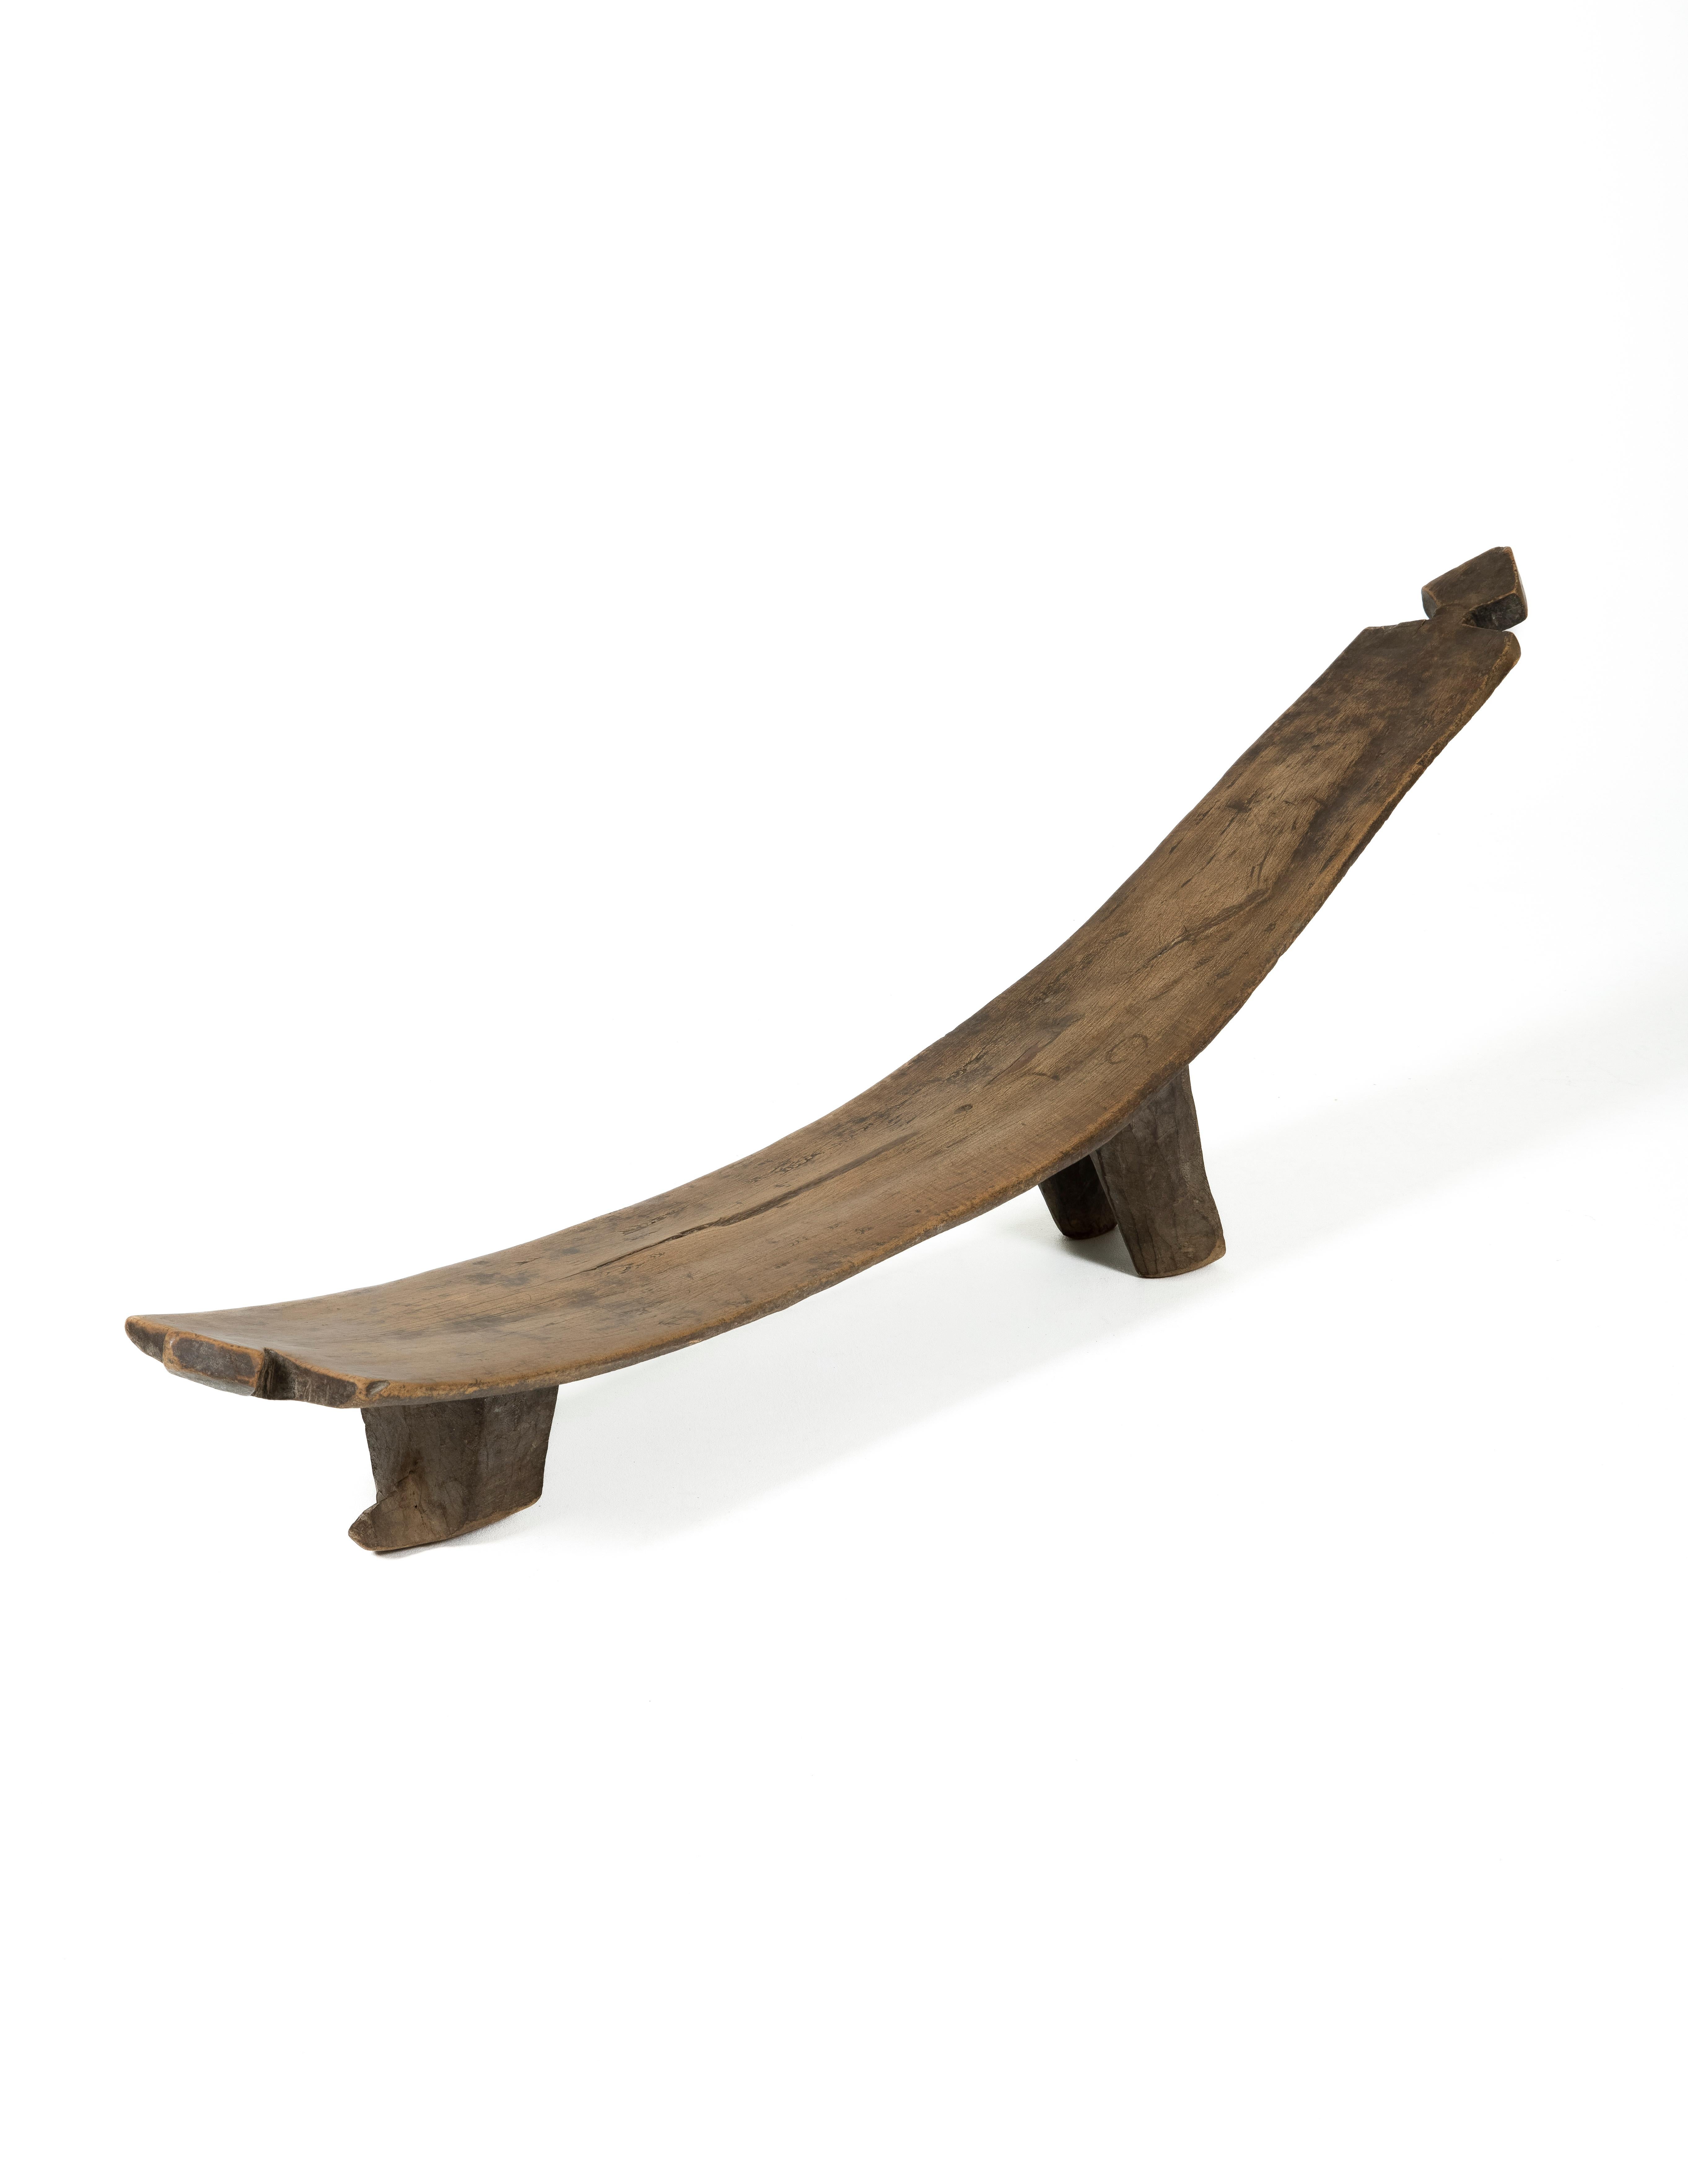 Senufo bench carved in a single piece of wood. Origin Ivory Coast. African handicraft. Nice patina.
LP625